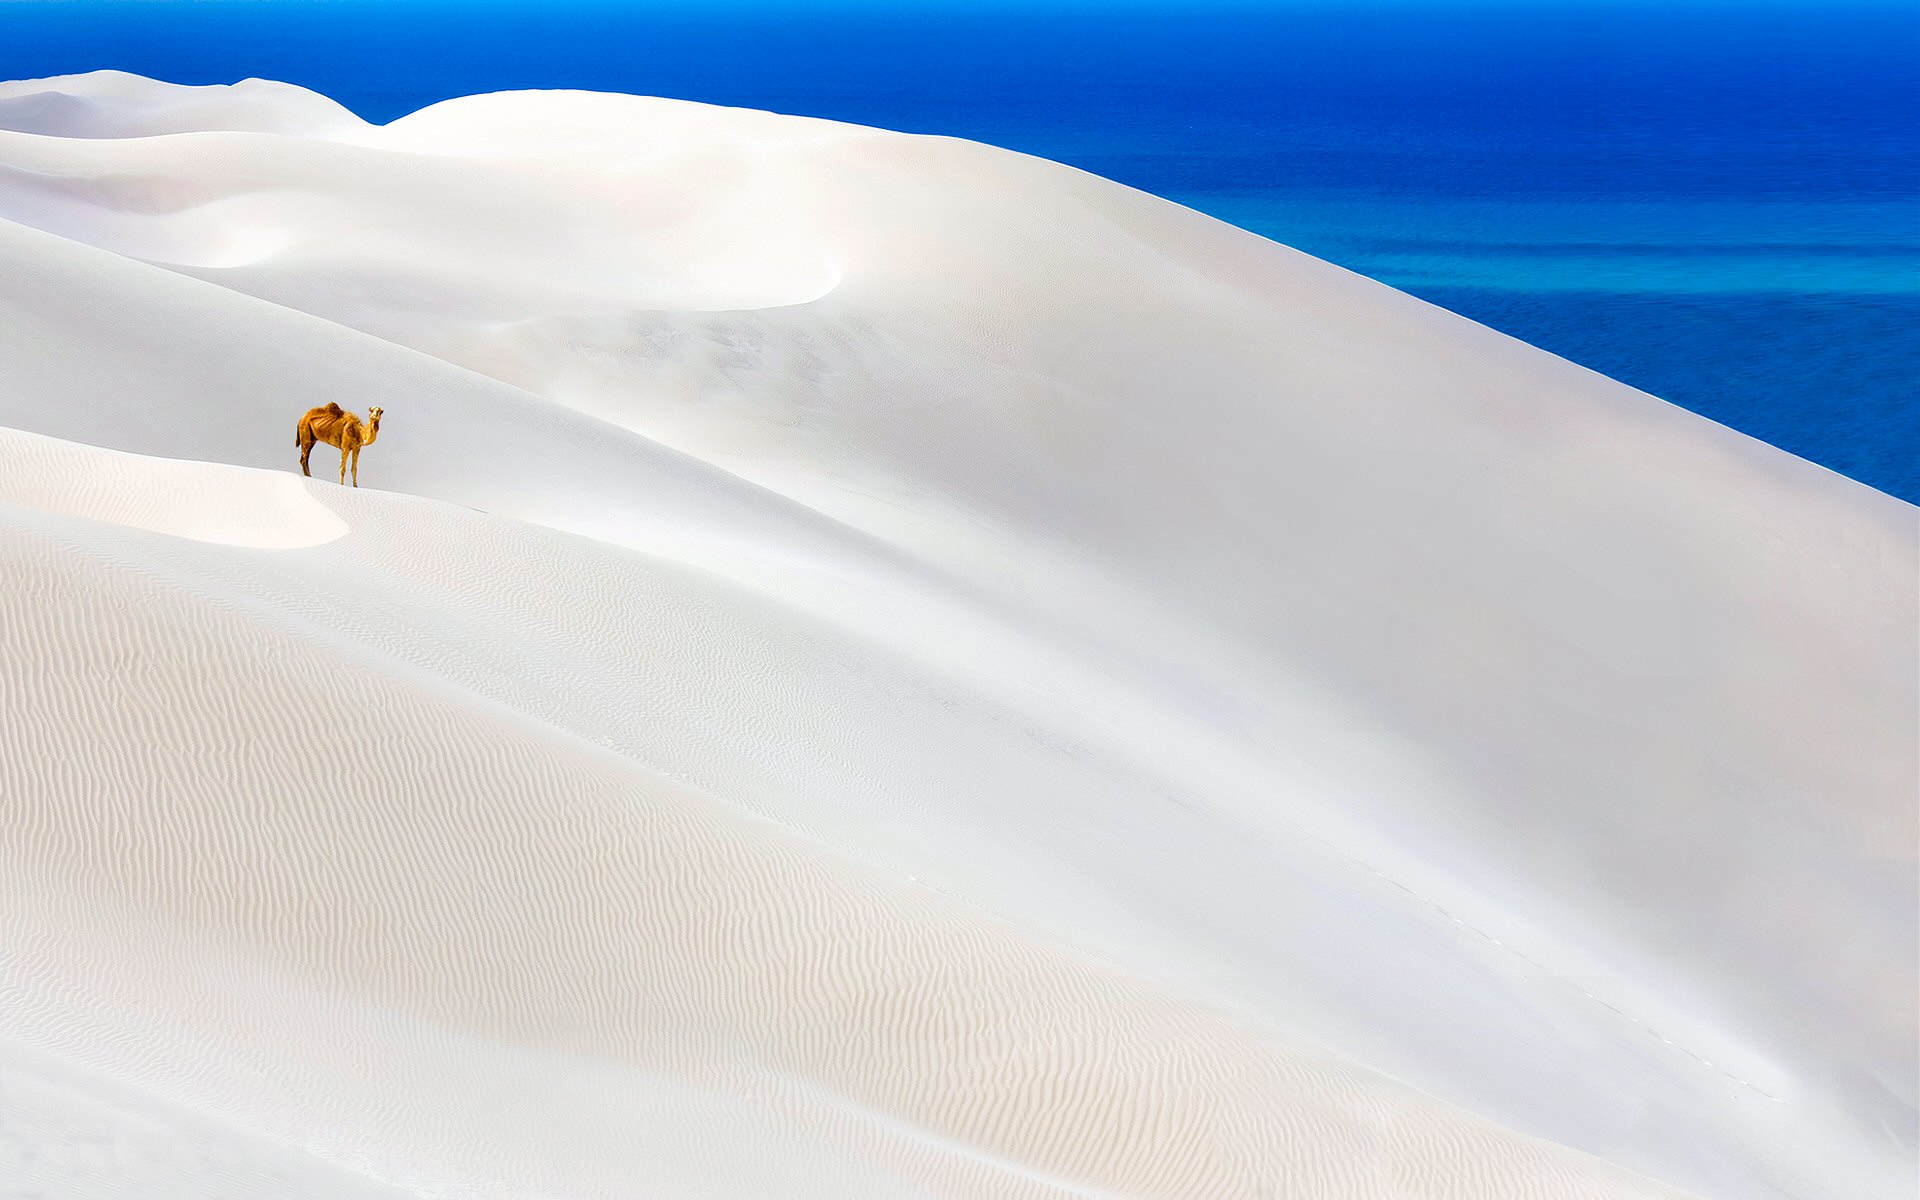 Alone Camel In White Desert Hd Wallpapers Free Download - Camel In White Desert - HD Wallpaper 